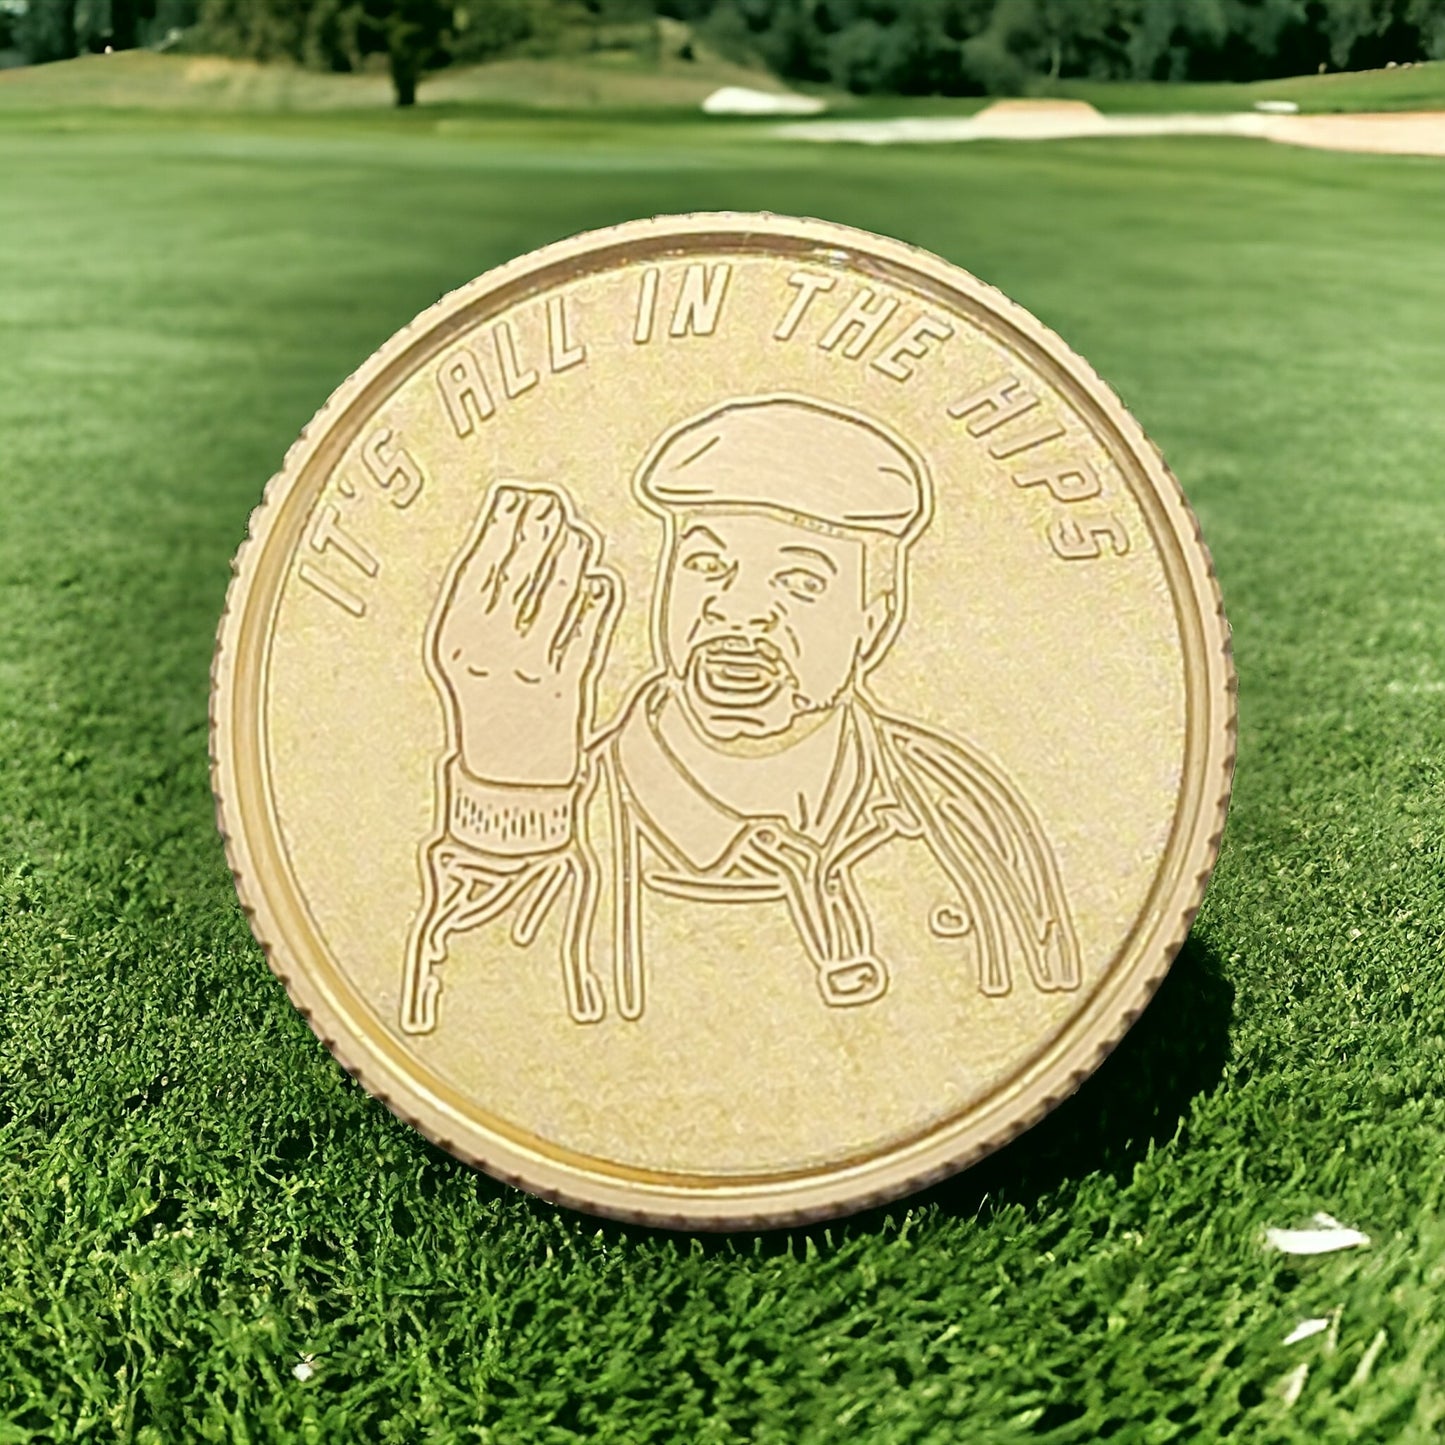 "The Chubbs" Solid Brass CNC Machined Laser Engraved Golf Ball Marker